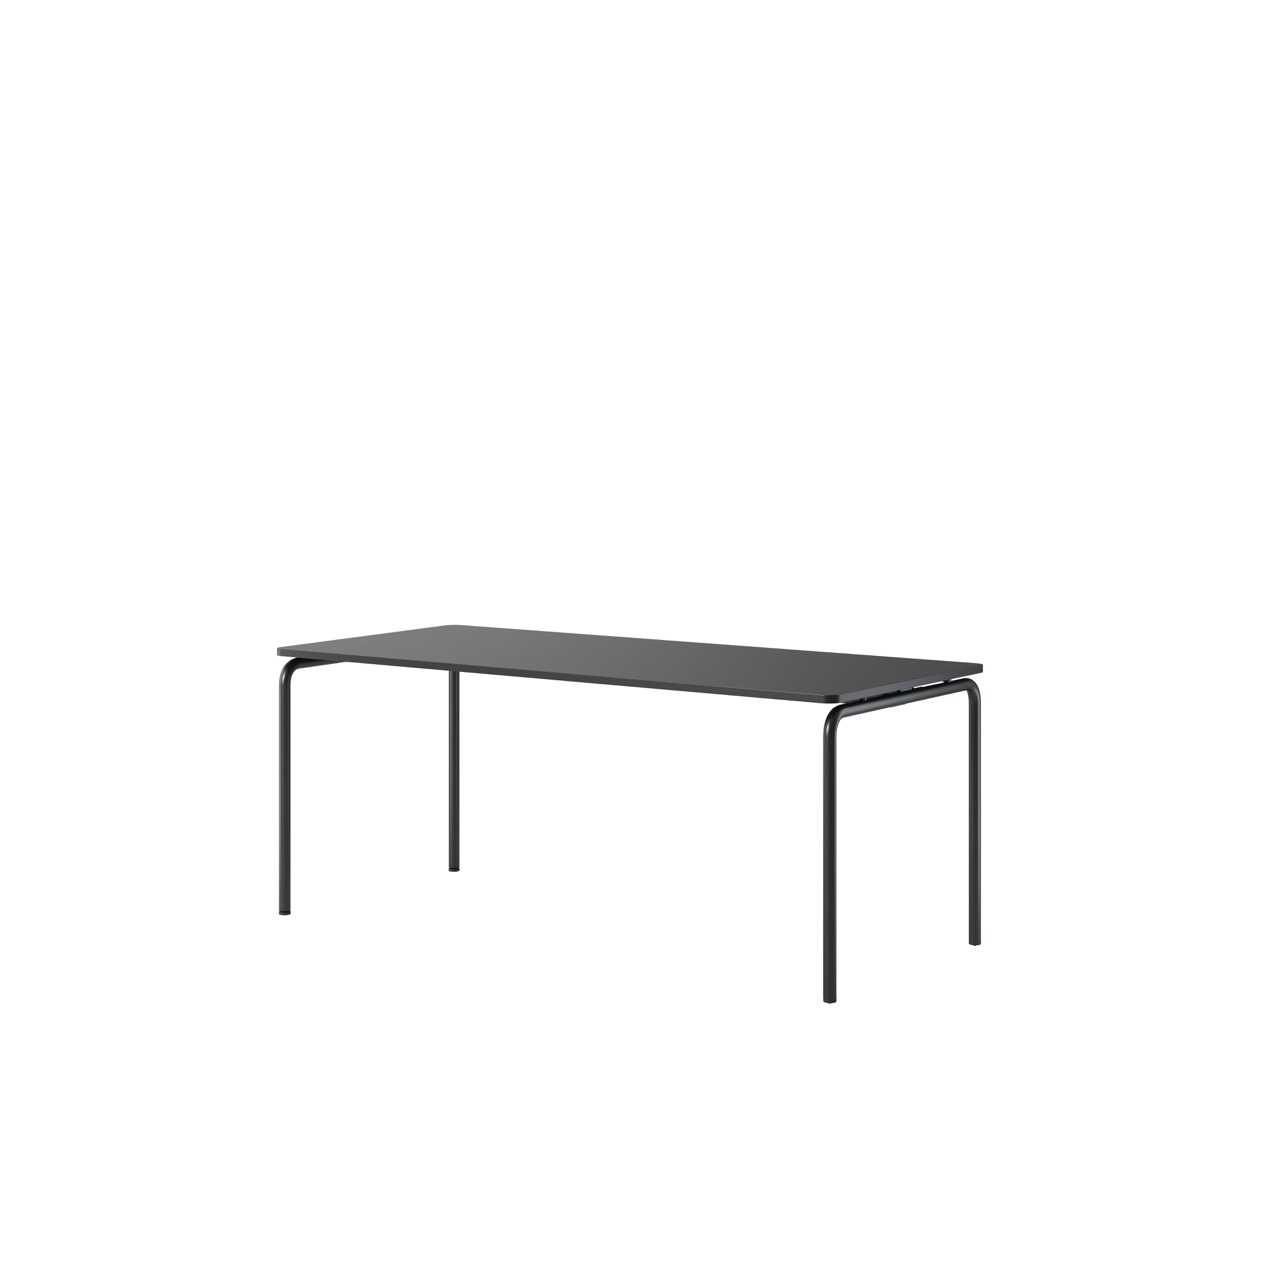 OCEE&FOUR - Tables - FourReal 74 - 180 x 80 - Straight - Packshot Image 1 Large